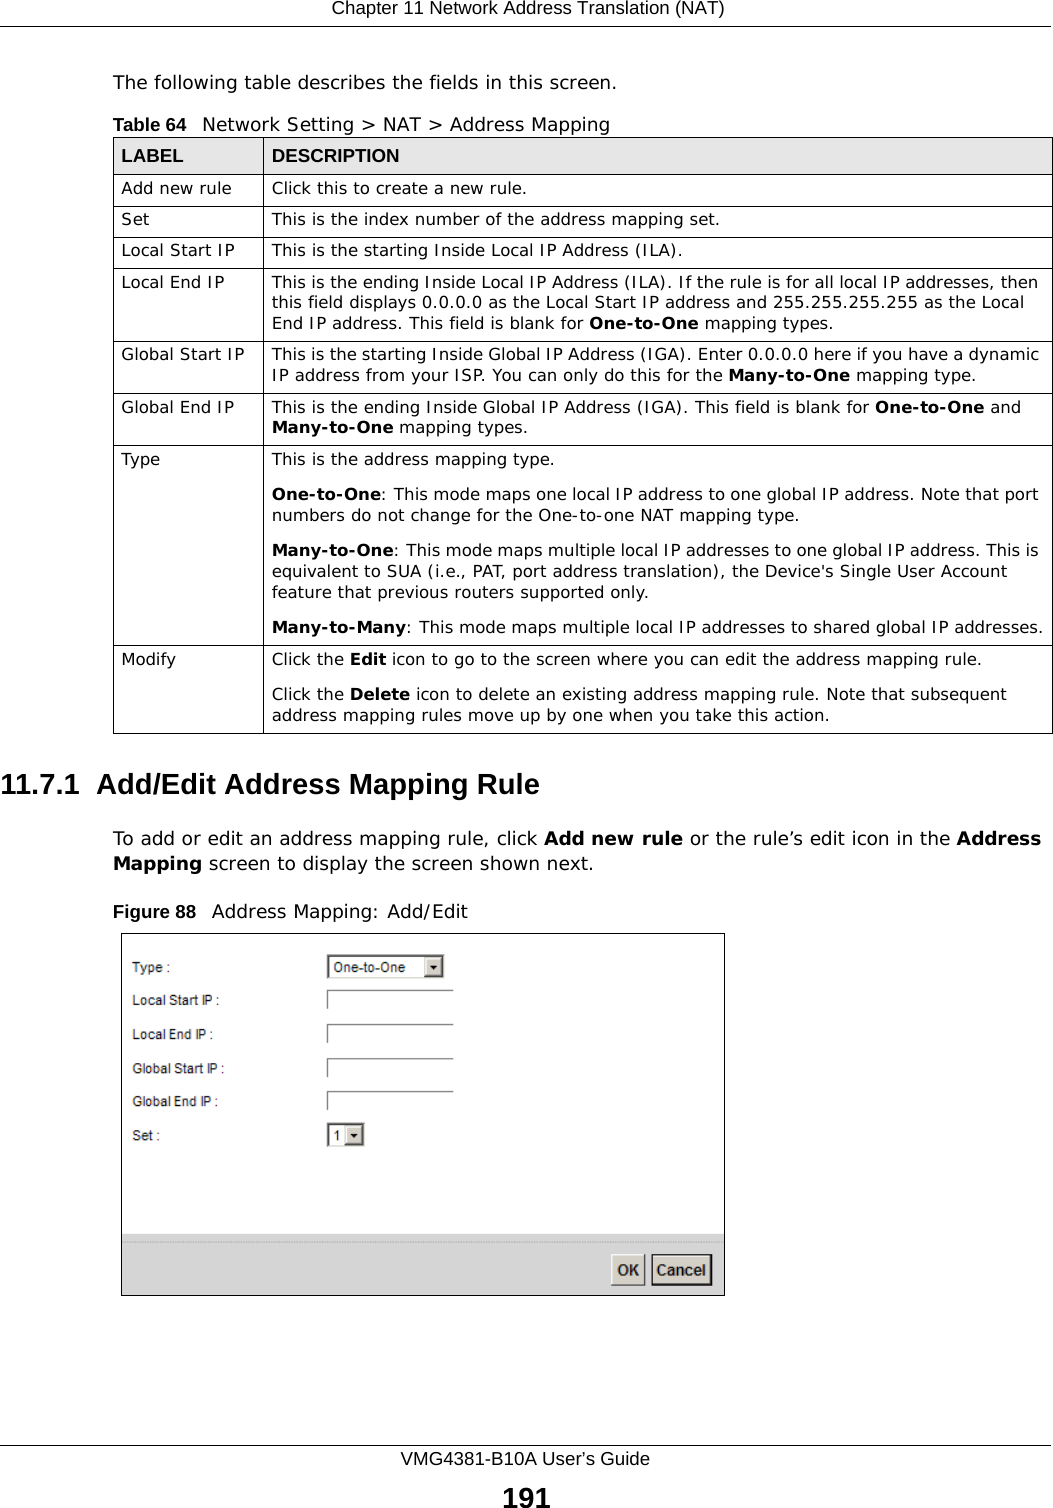  Chapter 11 Network Address Translation (NAT)VMG4381-B10A User’s Guide191The following table describes the fields in this screen.11.7.1  Add/Edit Address Mapping RuleTo add or edit an address mapping rule, click Add new rule or the rule’s edit icon in the Address Mapping screen to display the screen shown next. Figure 88   Address Mapping: Add/EditTable 64   Network Setting &gt; NAT &gt; Address MappingLABEL DESCRIPTIONAdd new rule Click this to create a new rule.Set This is the index number of the address mapping set.Local Start IP This is the starting Inside Local IP Address (ILA).Local End IP This is the ending Inside Local IP Address (ILA). If the rule is for all local IP addresses, then this field displays 0.0.0.0 as the Local Start IP address and 255.255.255.255 as the Local End IP address. This field is blank for One-to-One mapping types.Global Start IP This is the starting Inside Global IP Address (IGA). Enter 0.0.0.0 here if you have a dynamic IP address from your ISP. You can only do this for the Many-to-One mapping type. Global End IP This is the ending Inside Global IP Address (IGA). This field is blank for One-to-One and Many-to-One mapping types.Type This is the address mapping type.One-to-One: This mode maps one local IP address to one global IP address. Note that port numbers do not change for the One-to-one NAT mapping type.Many-to-One: This mode maps multiple local IP addresses to one global IP address. This is equivalent to SUA (i.e., PAT, port address translation), the Device&apos;s Single User Account feature that previous routers supported only. Many-to-Many: This mode maps multiple local IP addresses to shared global IP addresses.Modify Click the Edit icon to go to the screen where you can edit the address mapping rule.Click the Delete icon to delete an existing address mapping rule. Note that subsequent address mapping rules move up by one when you take this action.